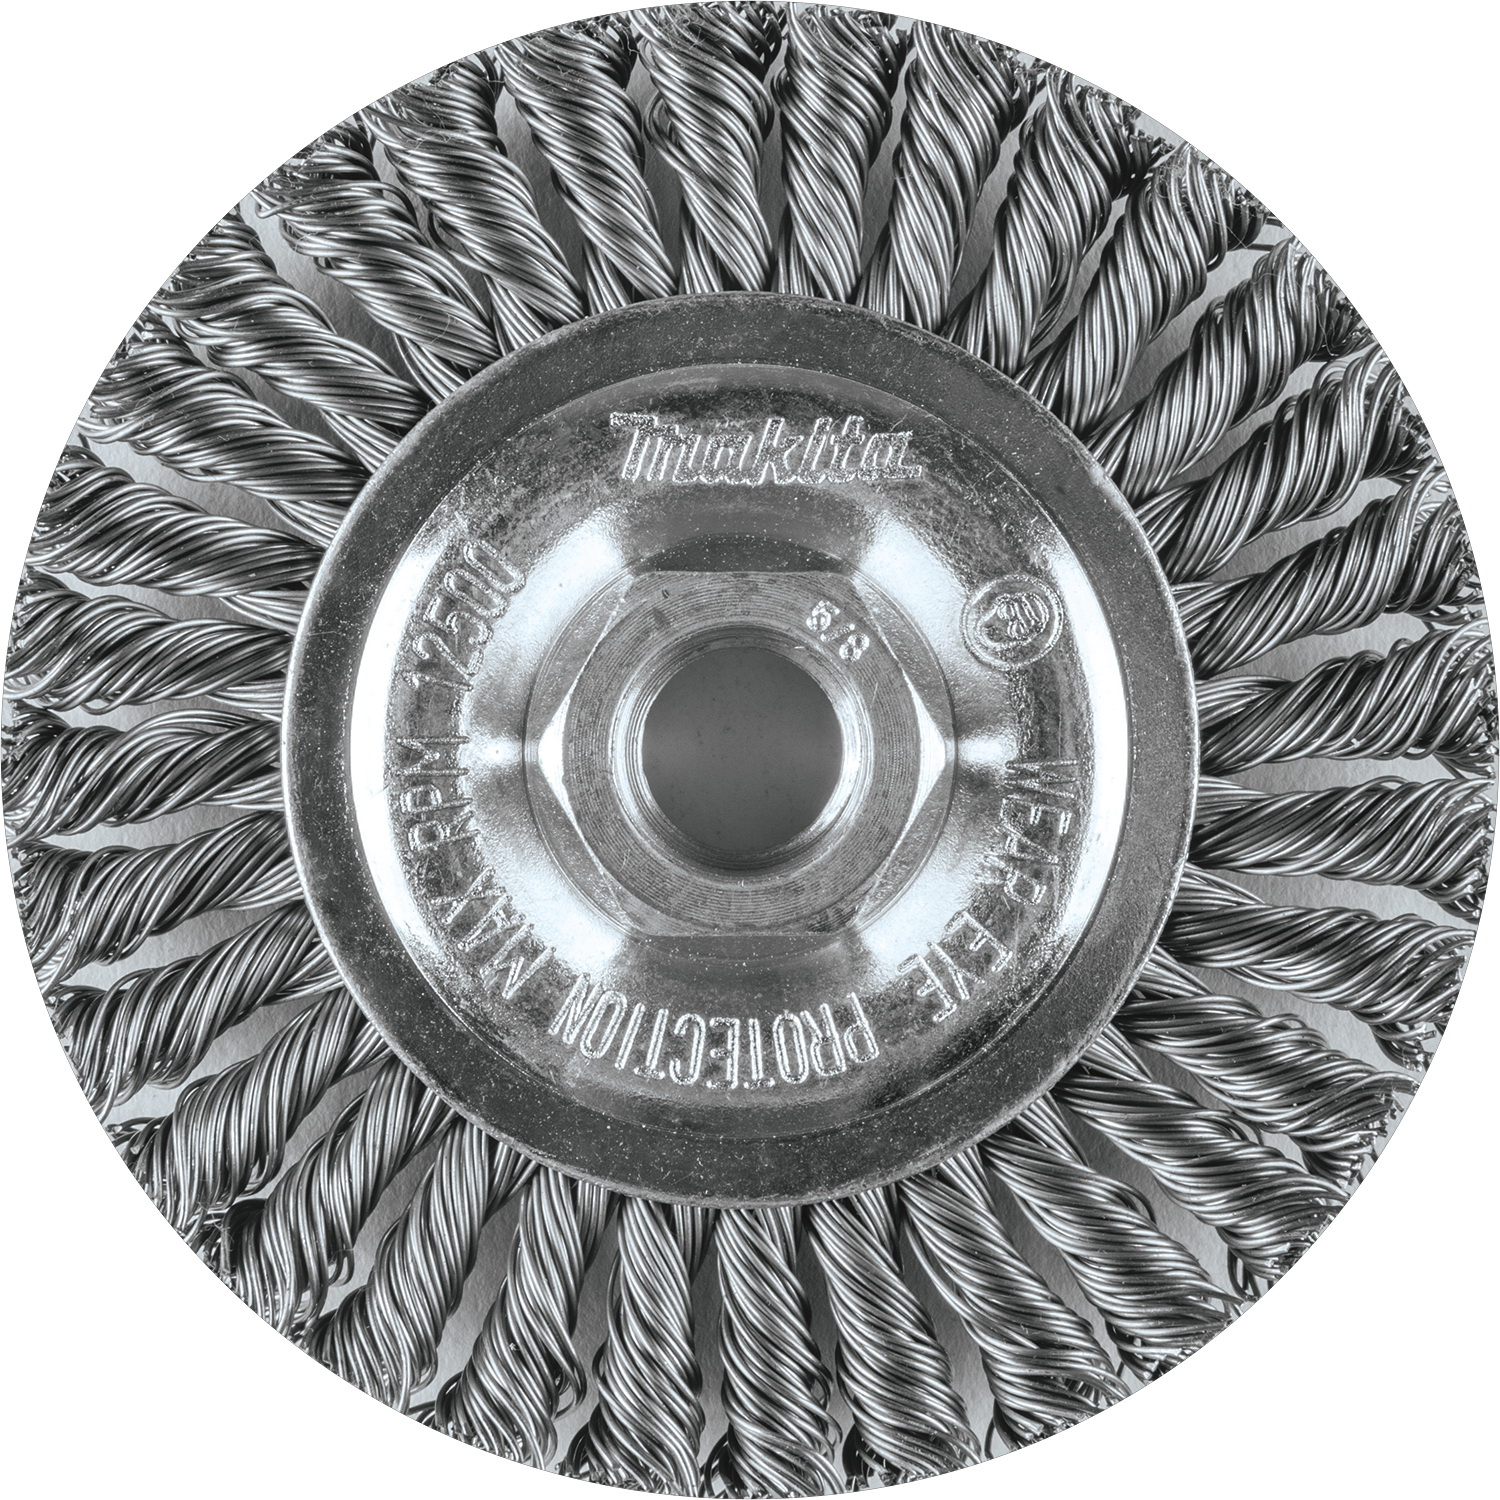 Makita A-98485 Wire Wheel, 4 in Dia, 5/8-11 Arbor/Shank, Twisted Bristle, 0.02 in Dia Bristle, Carbon Steel Bristle - 2